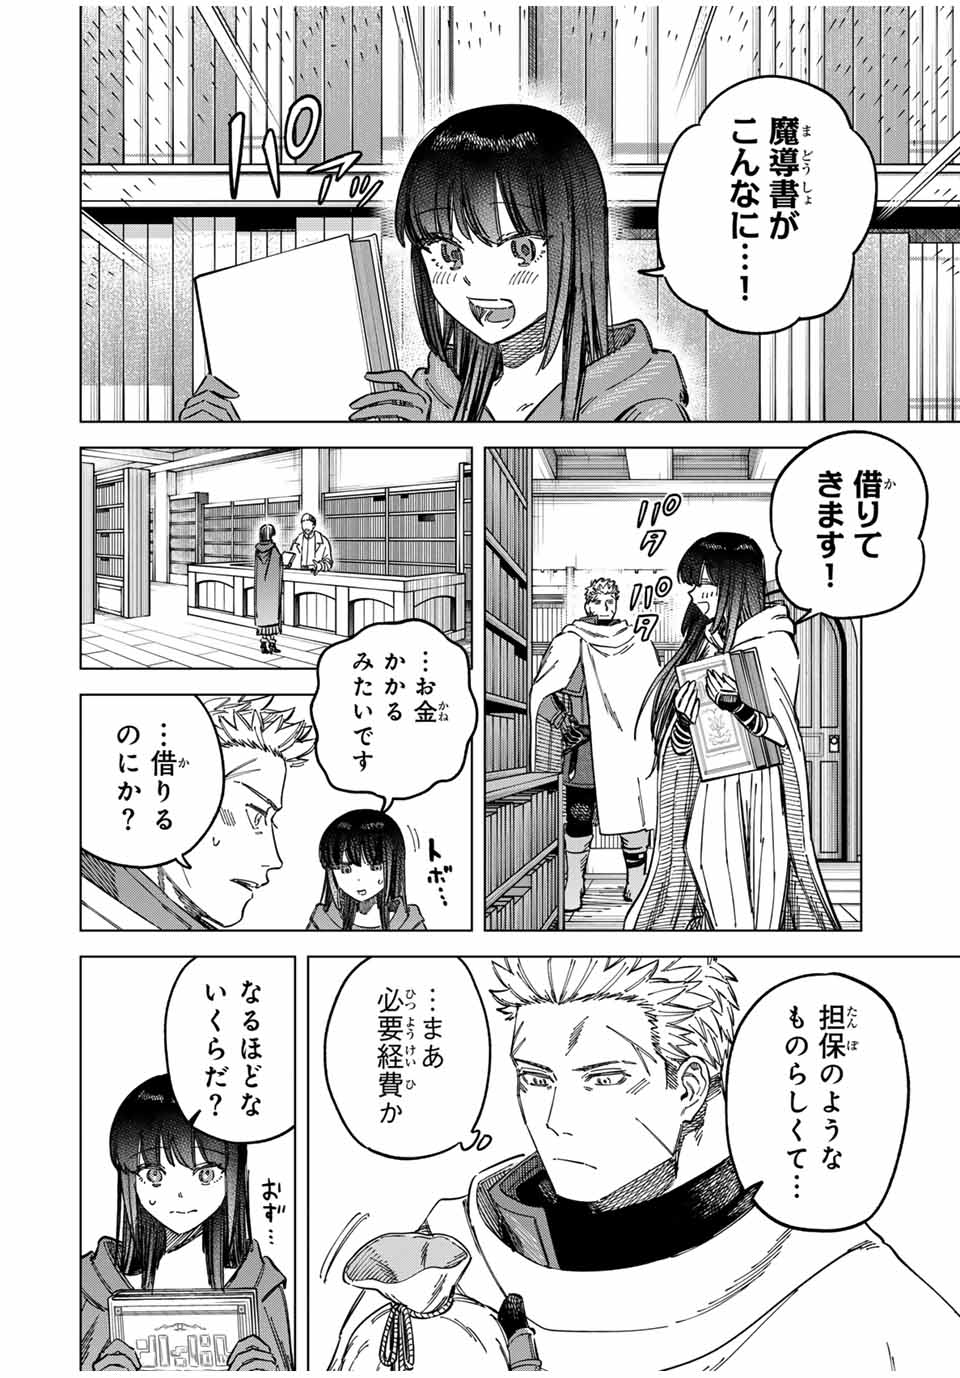 Witch and Mercenary 魔女と傭兵 第5.1話 - Page 10